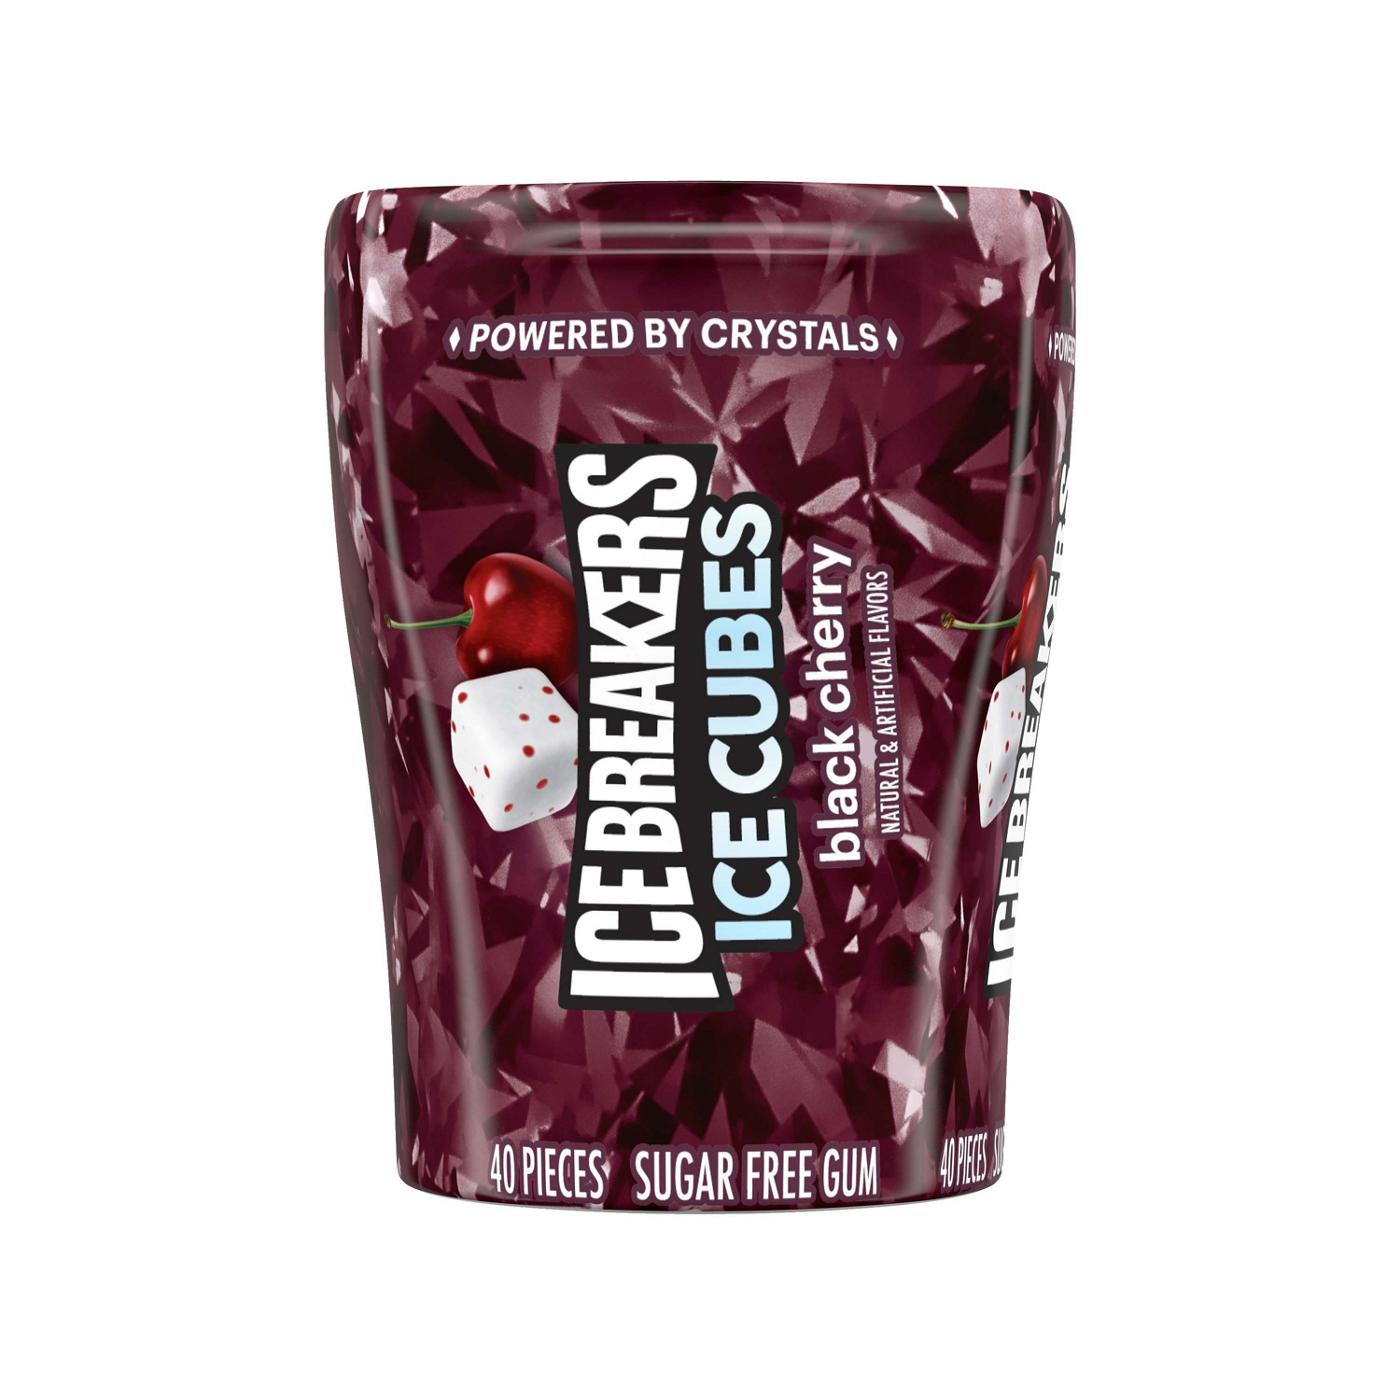 Ice Breakers Ice Cubes Black Cherry Sugar Free Chewing Gum Bottle; image 1 of 5